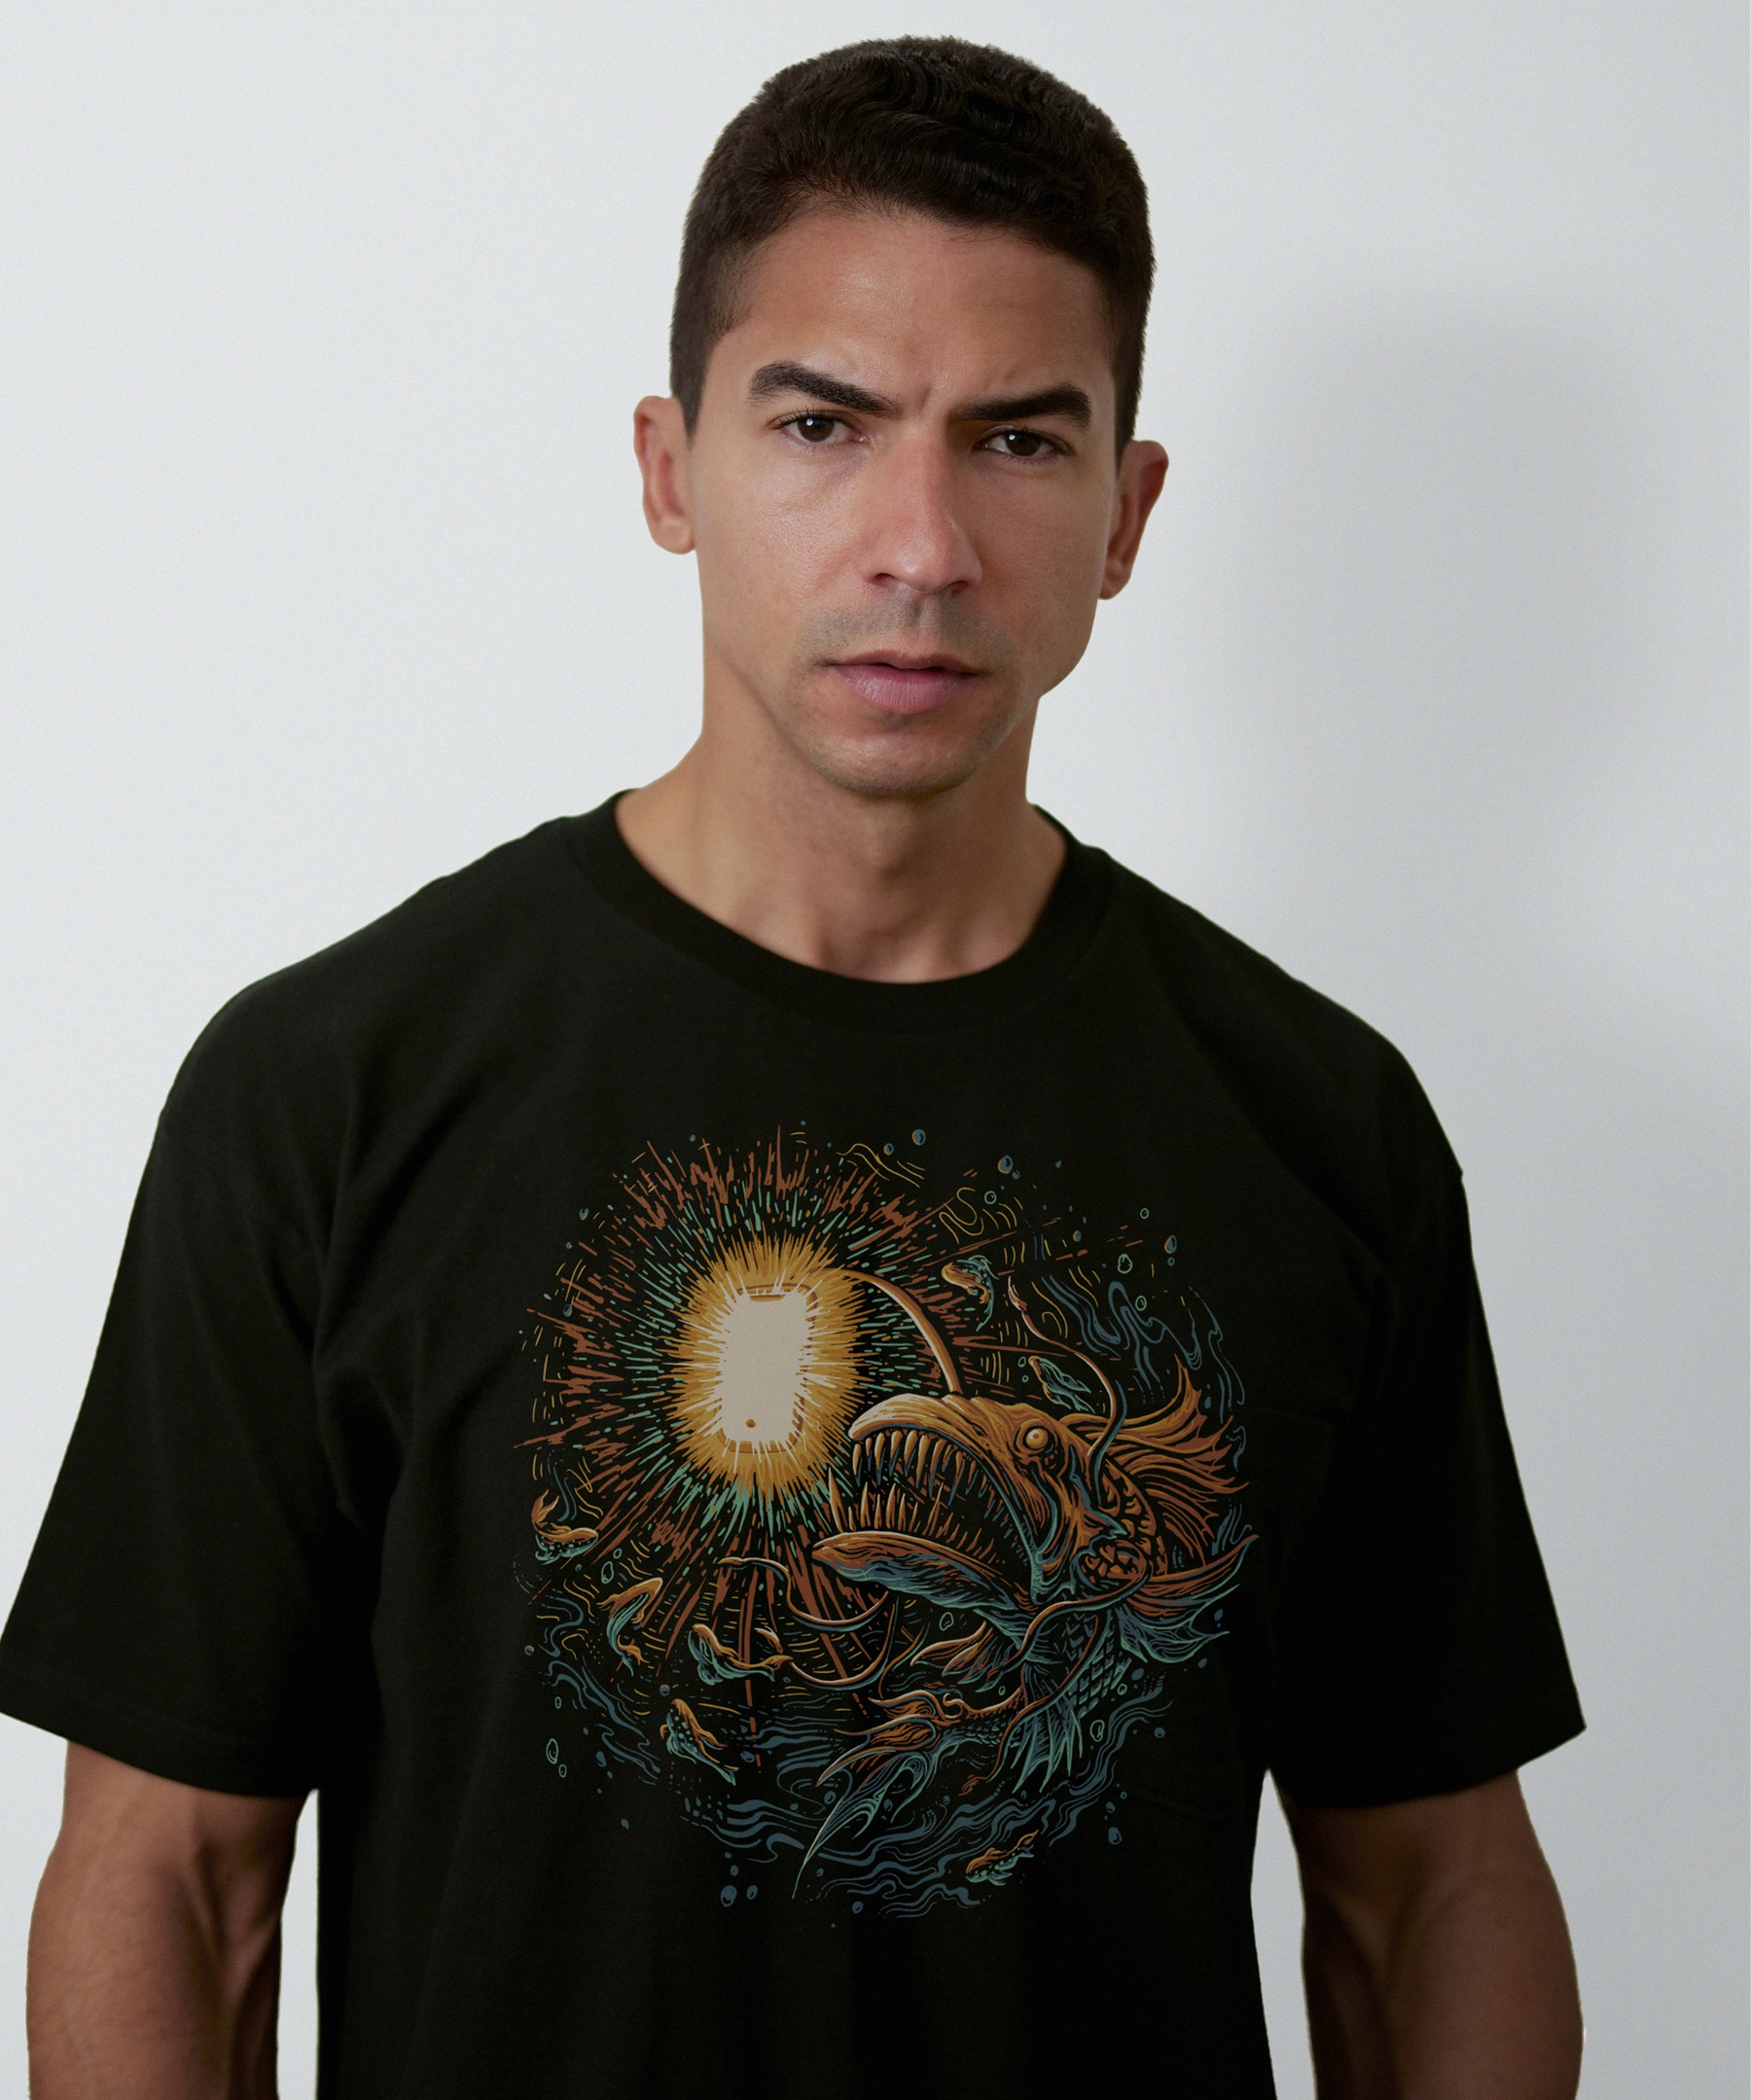 Angler Fish - Graphic Tee for Men